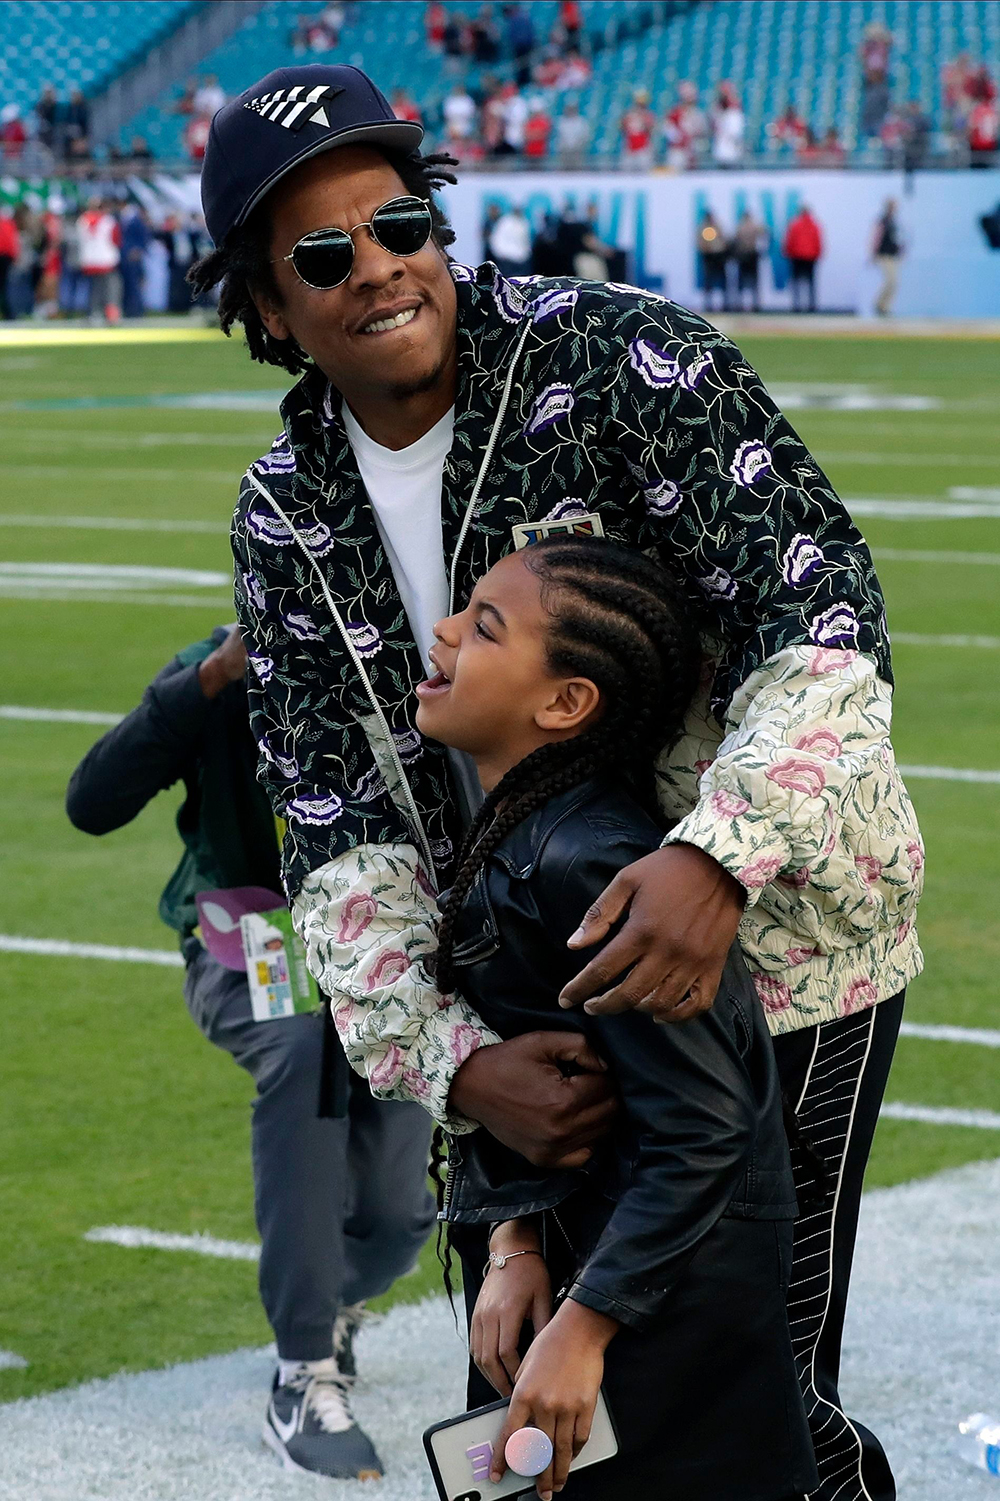 Entertainer Jay-Z embraces his daughter Blue Ivy Carter as they arrive for the NFL Super Bowl 54 football game between the San Francisco 49ers and the Kansas City Chiefs, in Miami
49ers Chiefs Super Bowl Football, Miami Gardens, USA - 02 Feb 2020